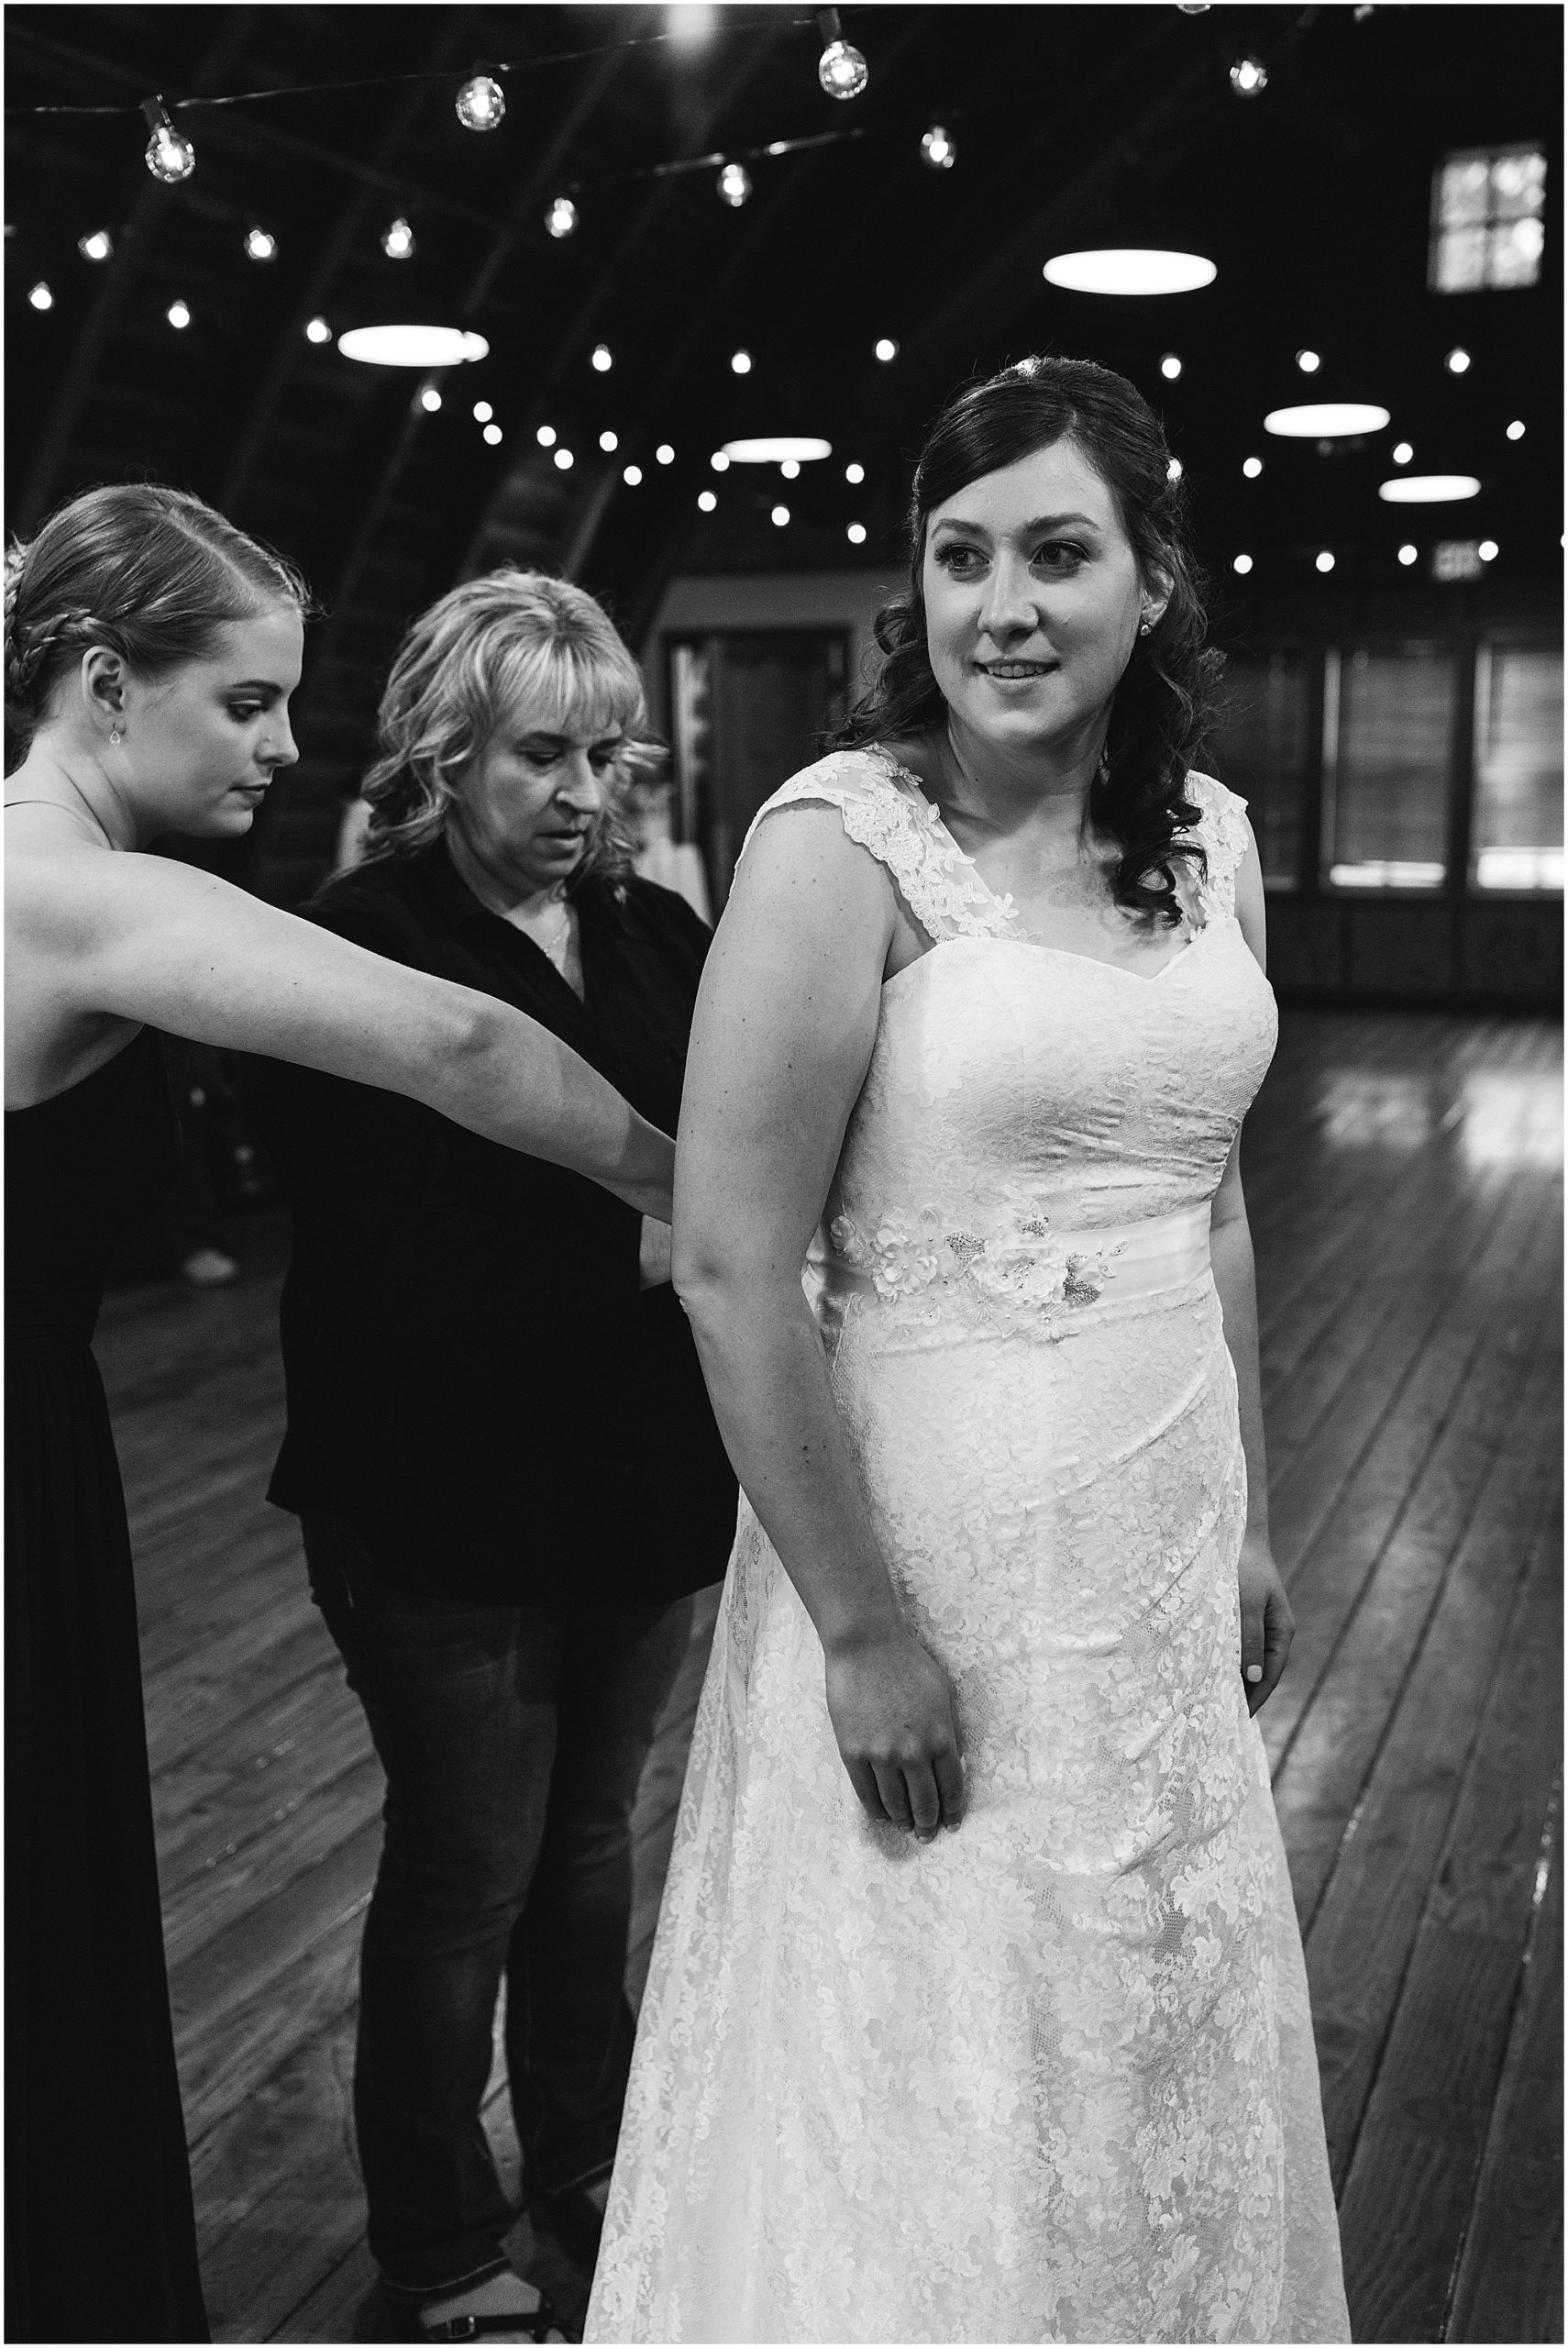 The bride's mother and maid of honor help place her sash around her waist in this beautiful black and white image from a wedding at Hollinshead Barn in Bend, Oregon. | Erica Swantek Photography